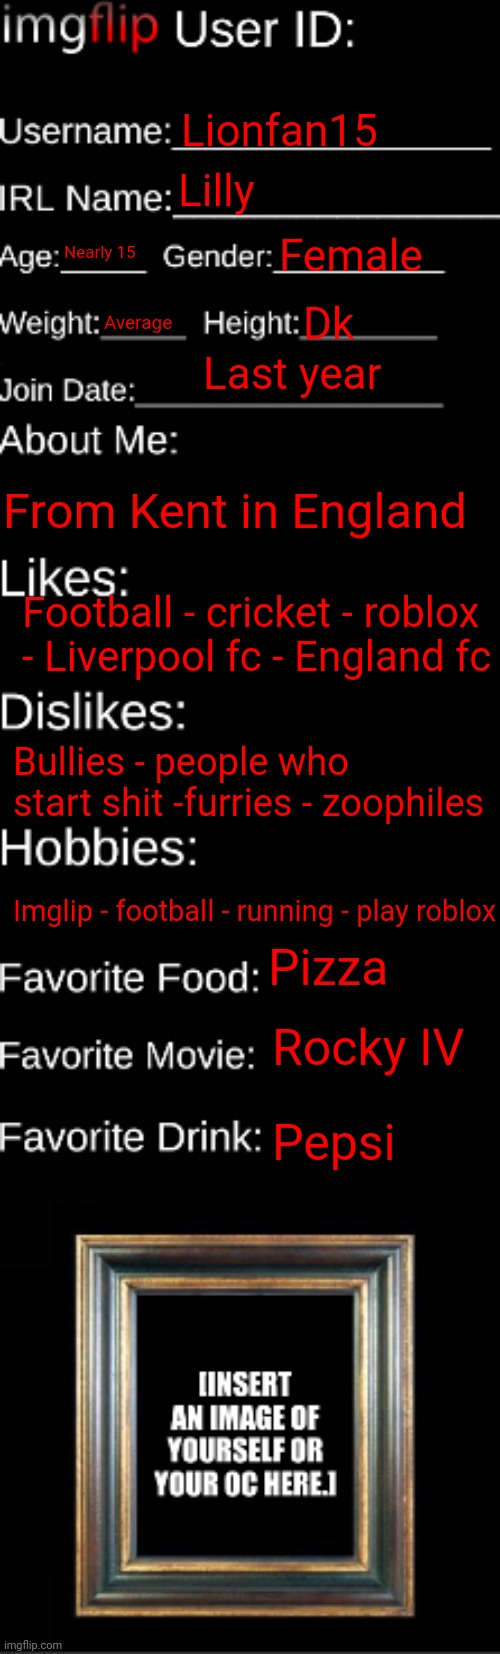 Know me | Lionfan15; Lilly; Nearly 15; Female; Dk; Average; Last year; From Kent in England; Football - cricket - roblox - Liverpool fc - England fc; Bullies - people who start shit -furries - zoophiles; Imglip - football - running - play roblox; Pizza; Rocky IV; Pepsi | image tagged in imgflip id card | made w/ Imgflip meme maker